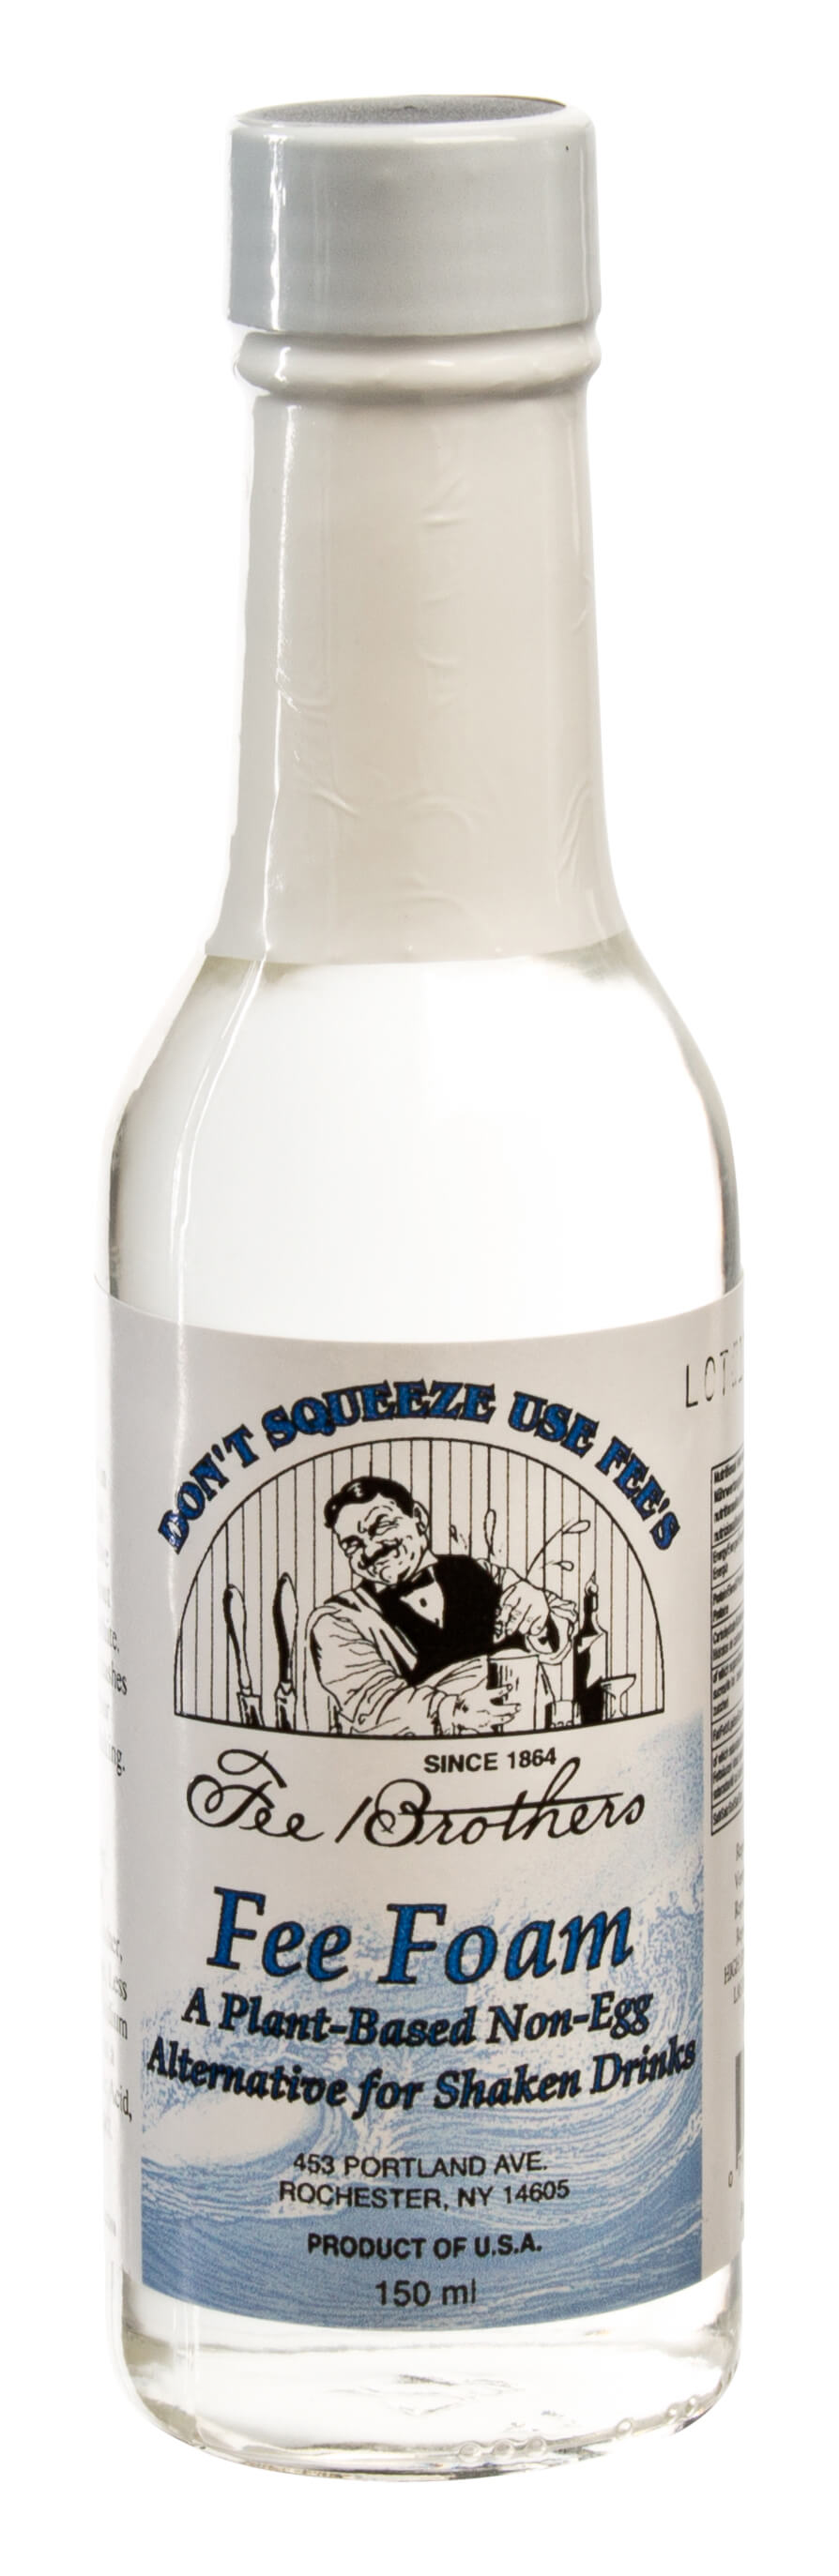 Liquid protein replacement 'Fee Foam' by Fee Brothers - 150ml bottle